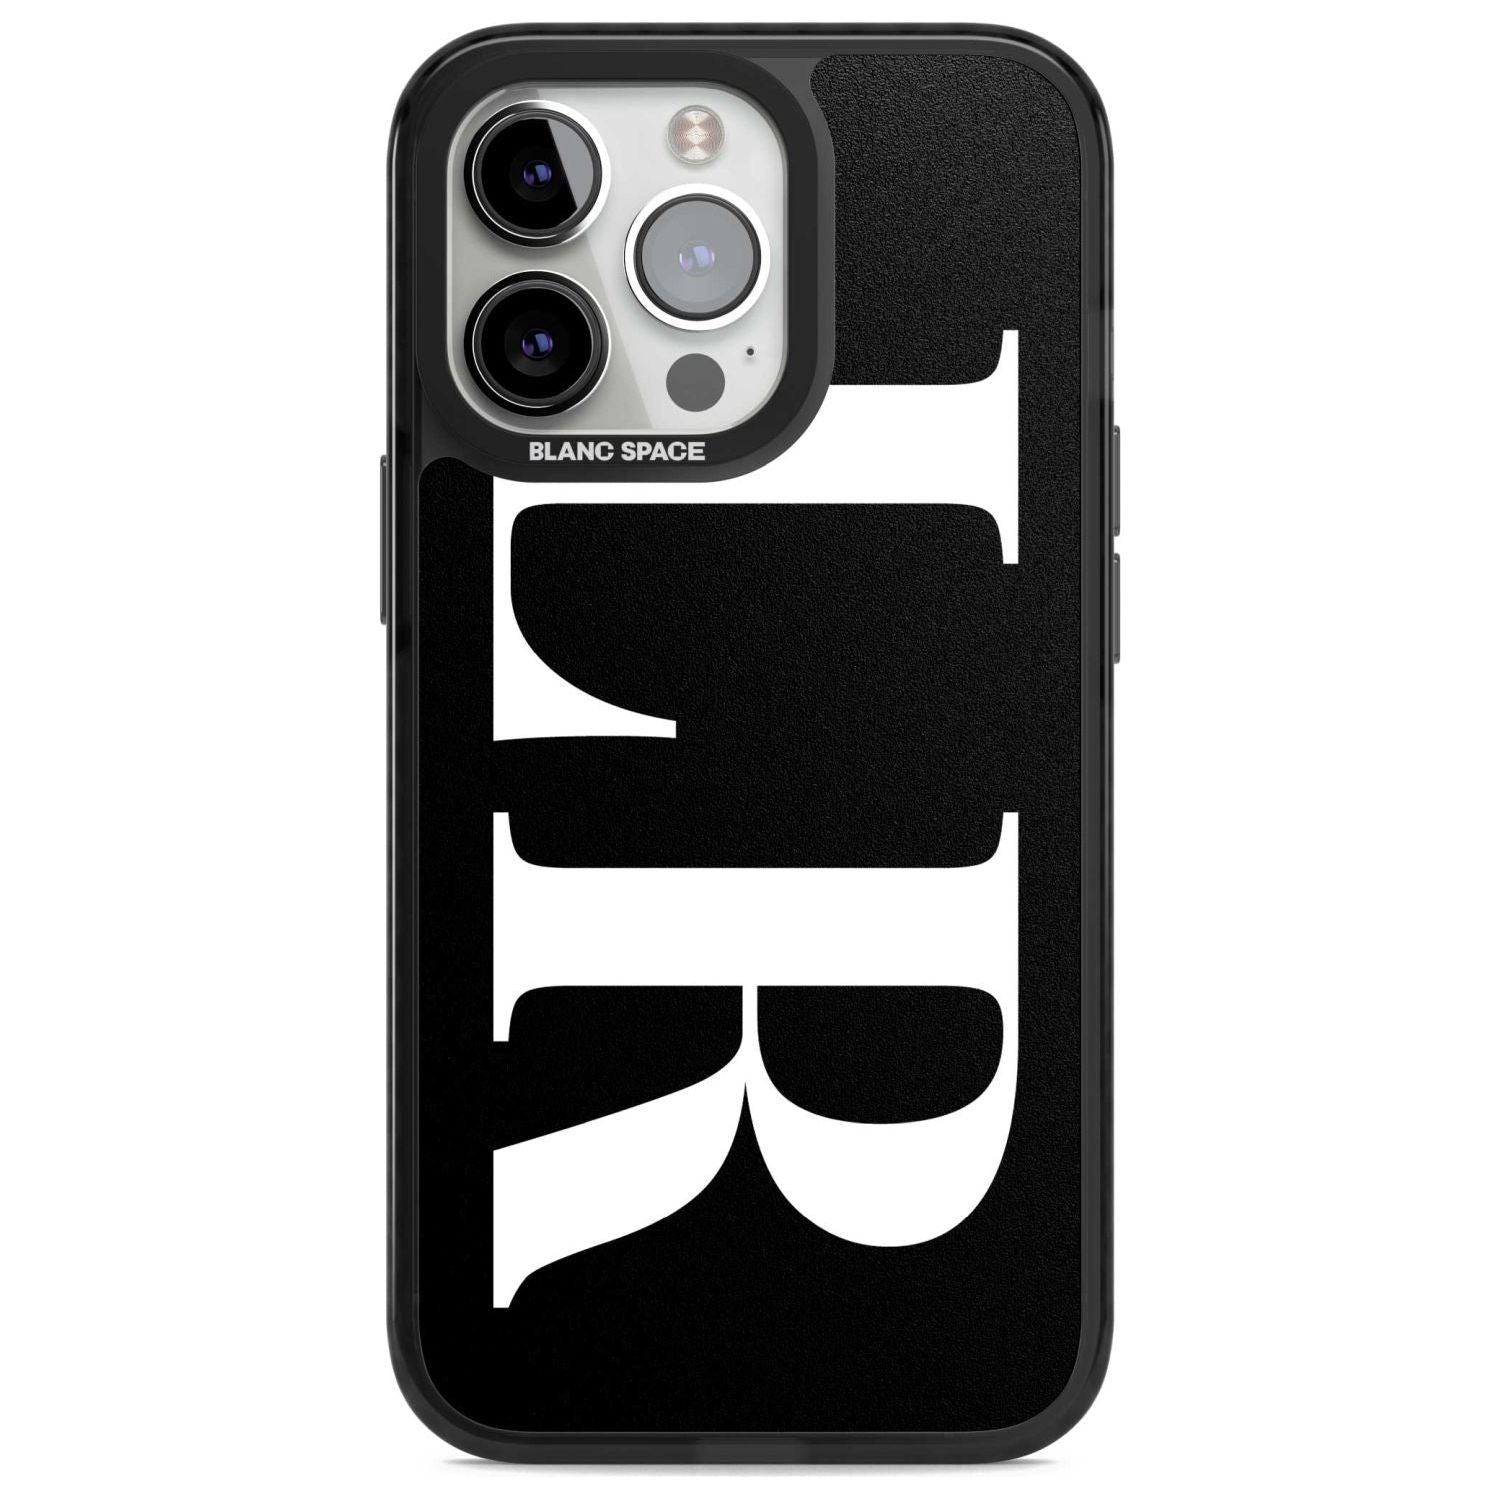 Personalised White & Black Letters Custom Phone Case iPhone 15 Pro Max / Magsafe Black Impact Case,iPhone 15 Pro / Magsafe Black Impact Case,iPhone 14 Pro Max / Magsafe Black Impact Case,iPhone 14 Pro / Magsafe Black Impact Case,iPhone 13 Pro / Magsafe Black Impact Case Blanc Space